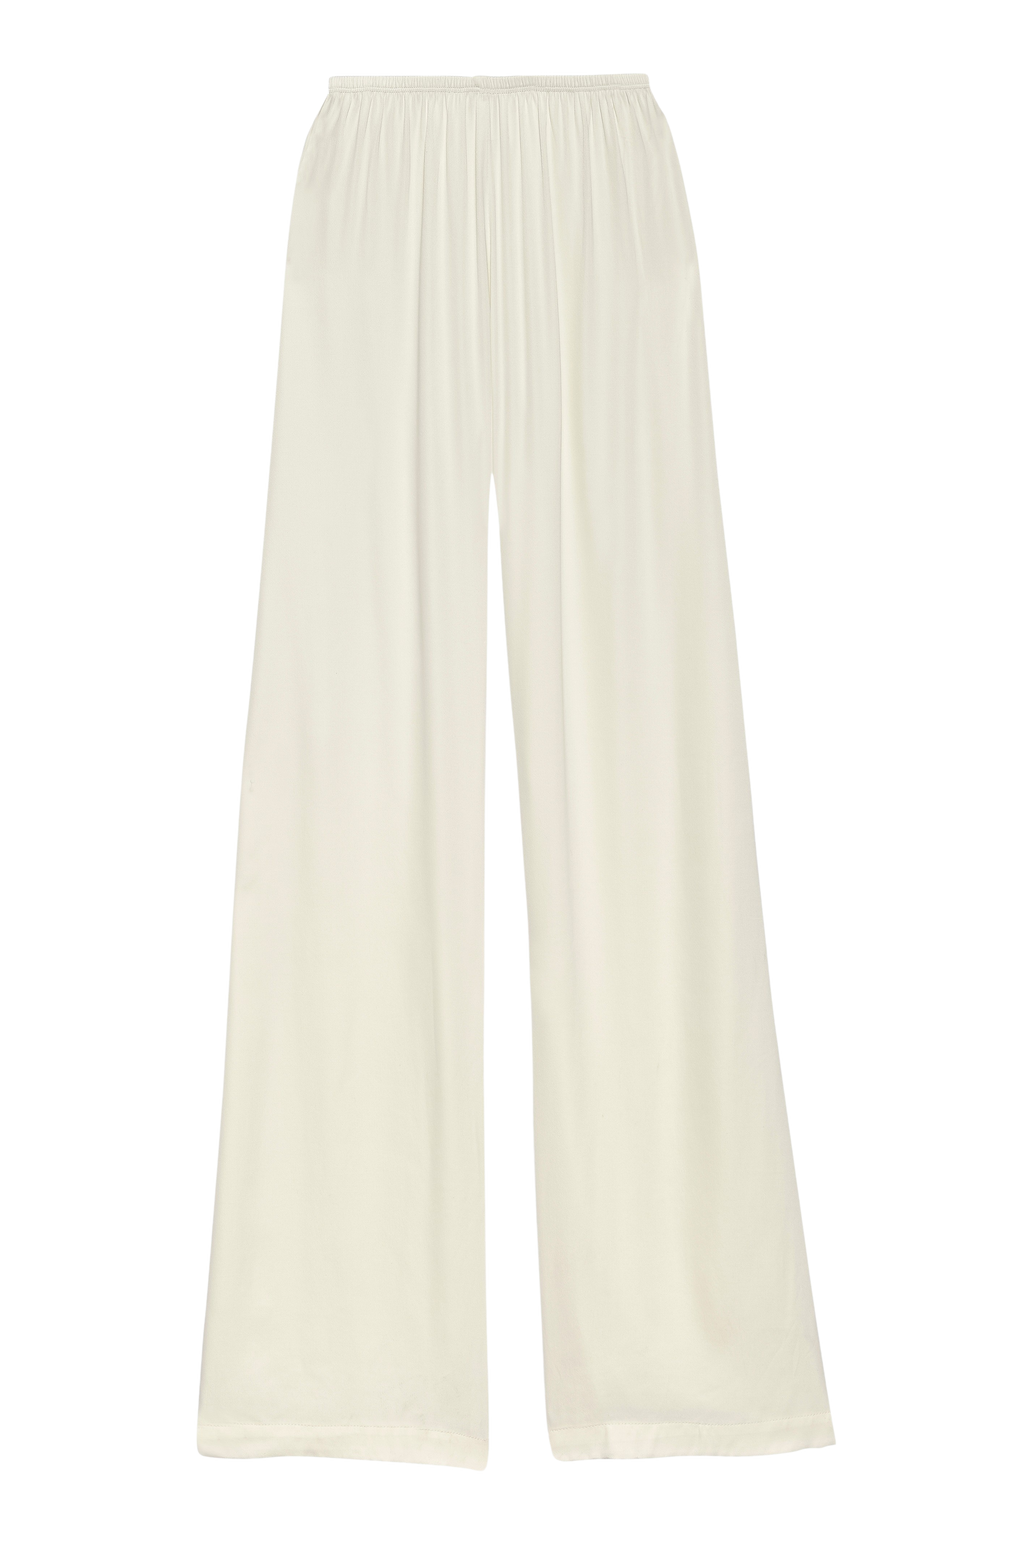 The Satiny Simple Pant